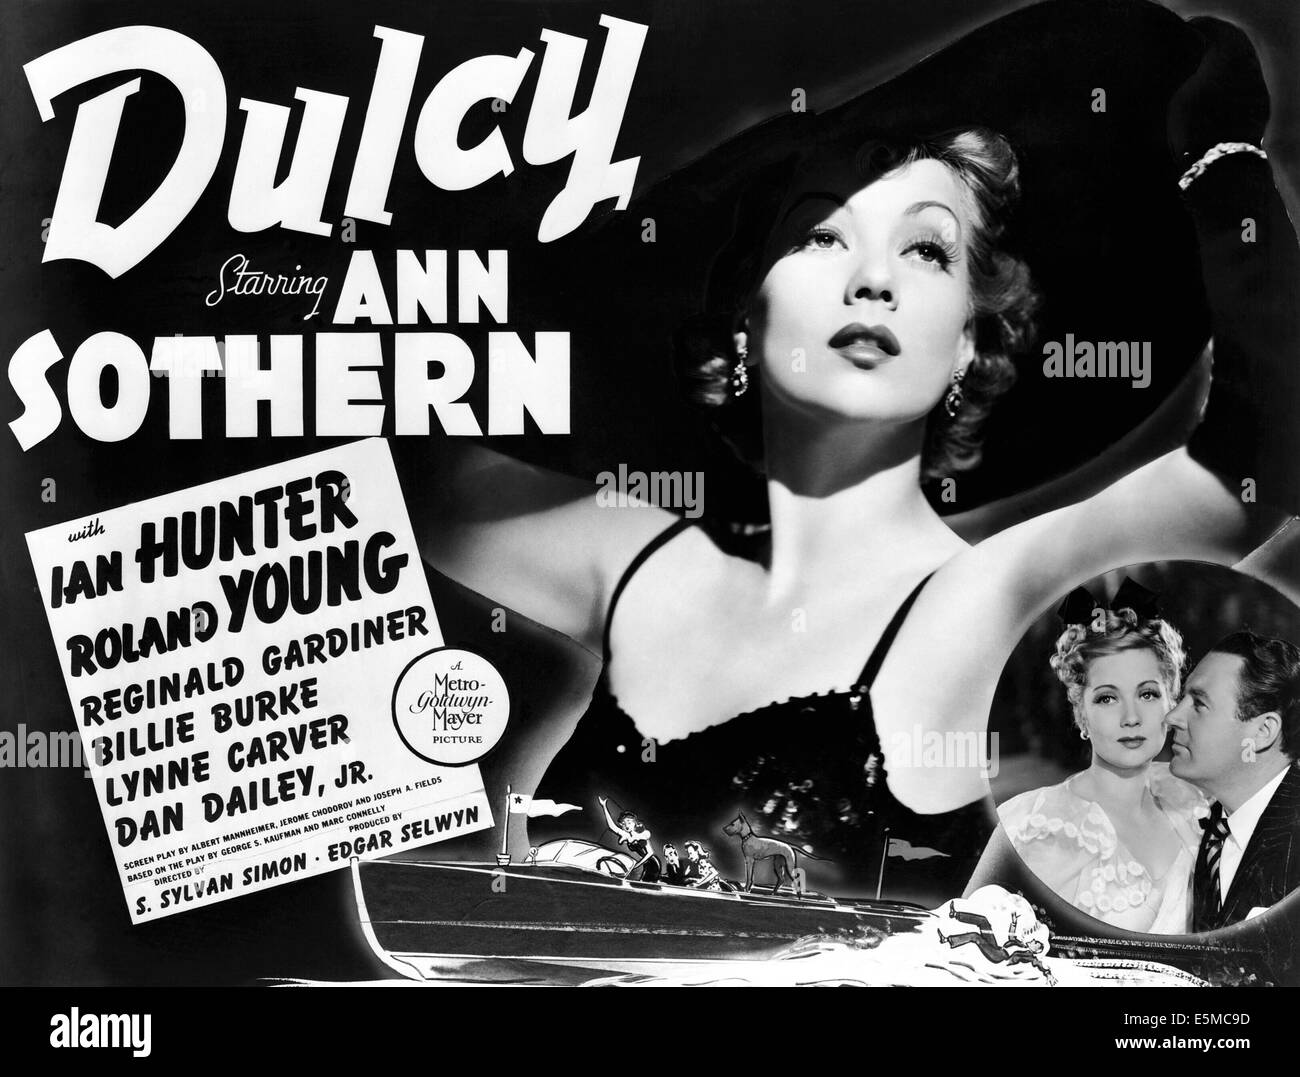 DULCY, Ann Sothern, Ian Hunter, 1940 Banque D'Images